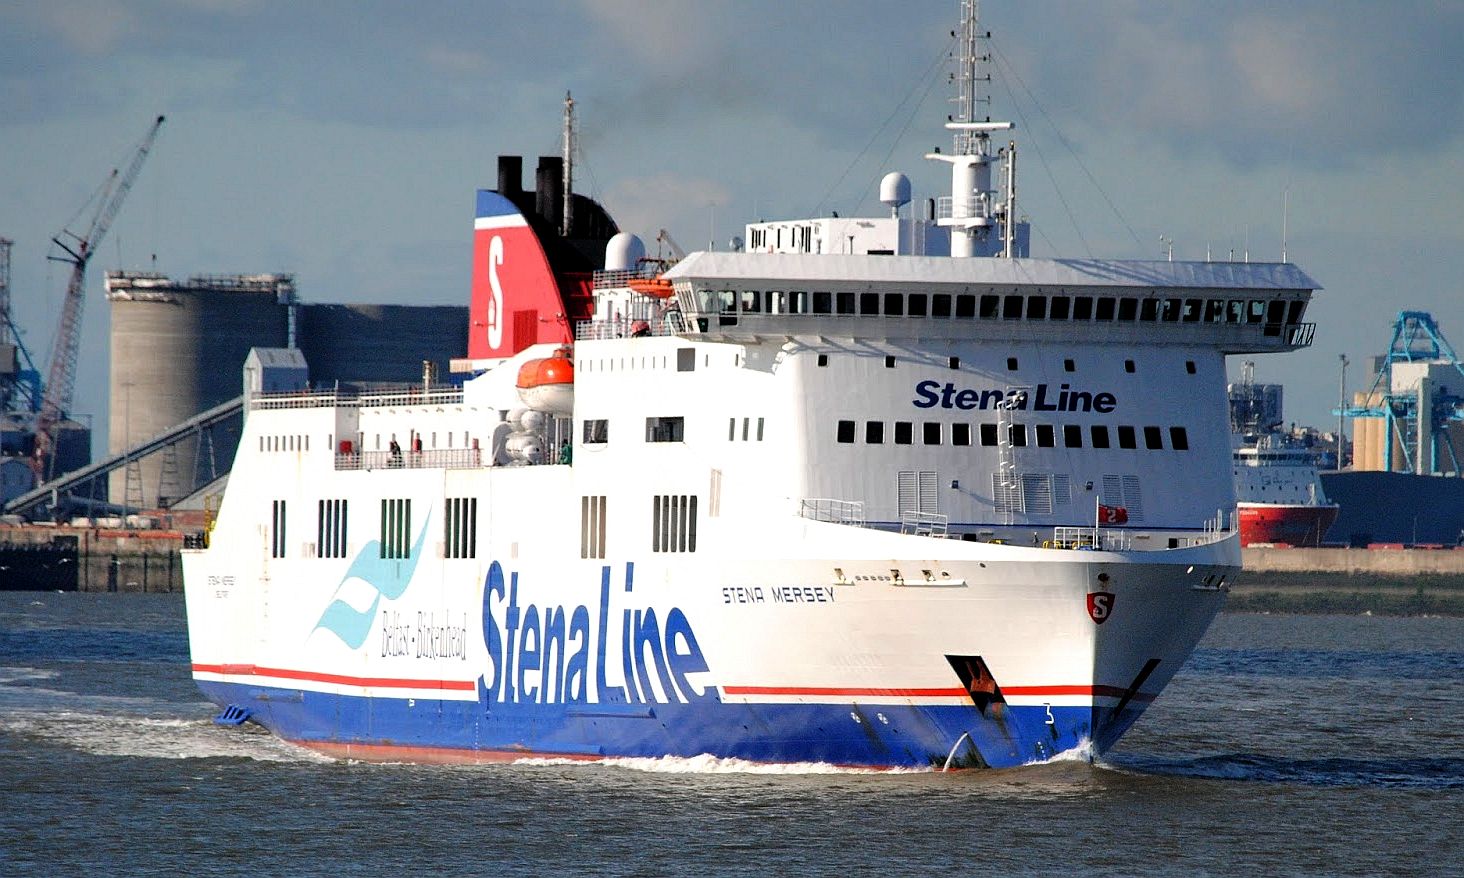 StenaLine ferry services River Mersey, Liverpool